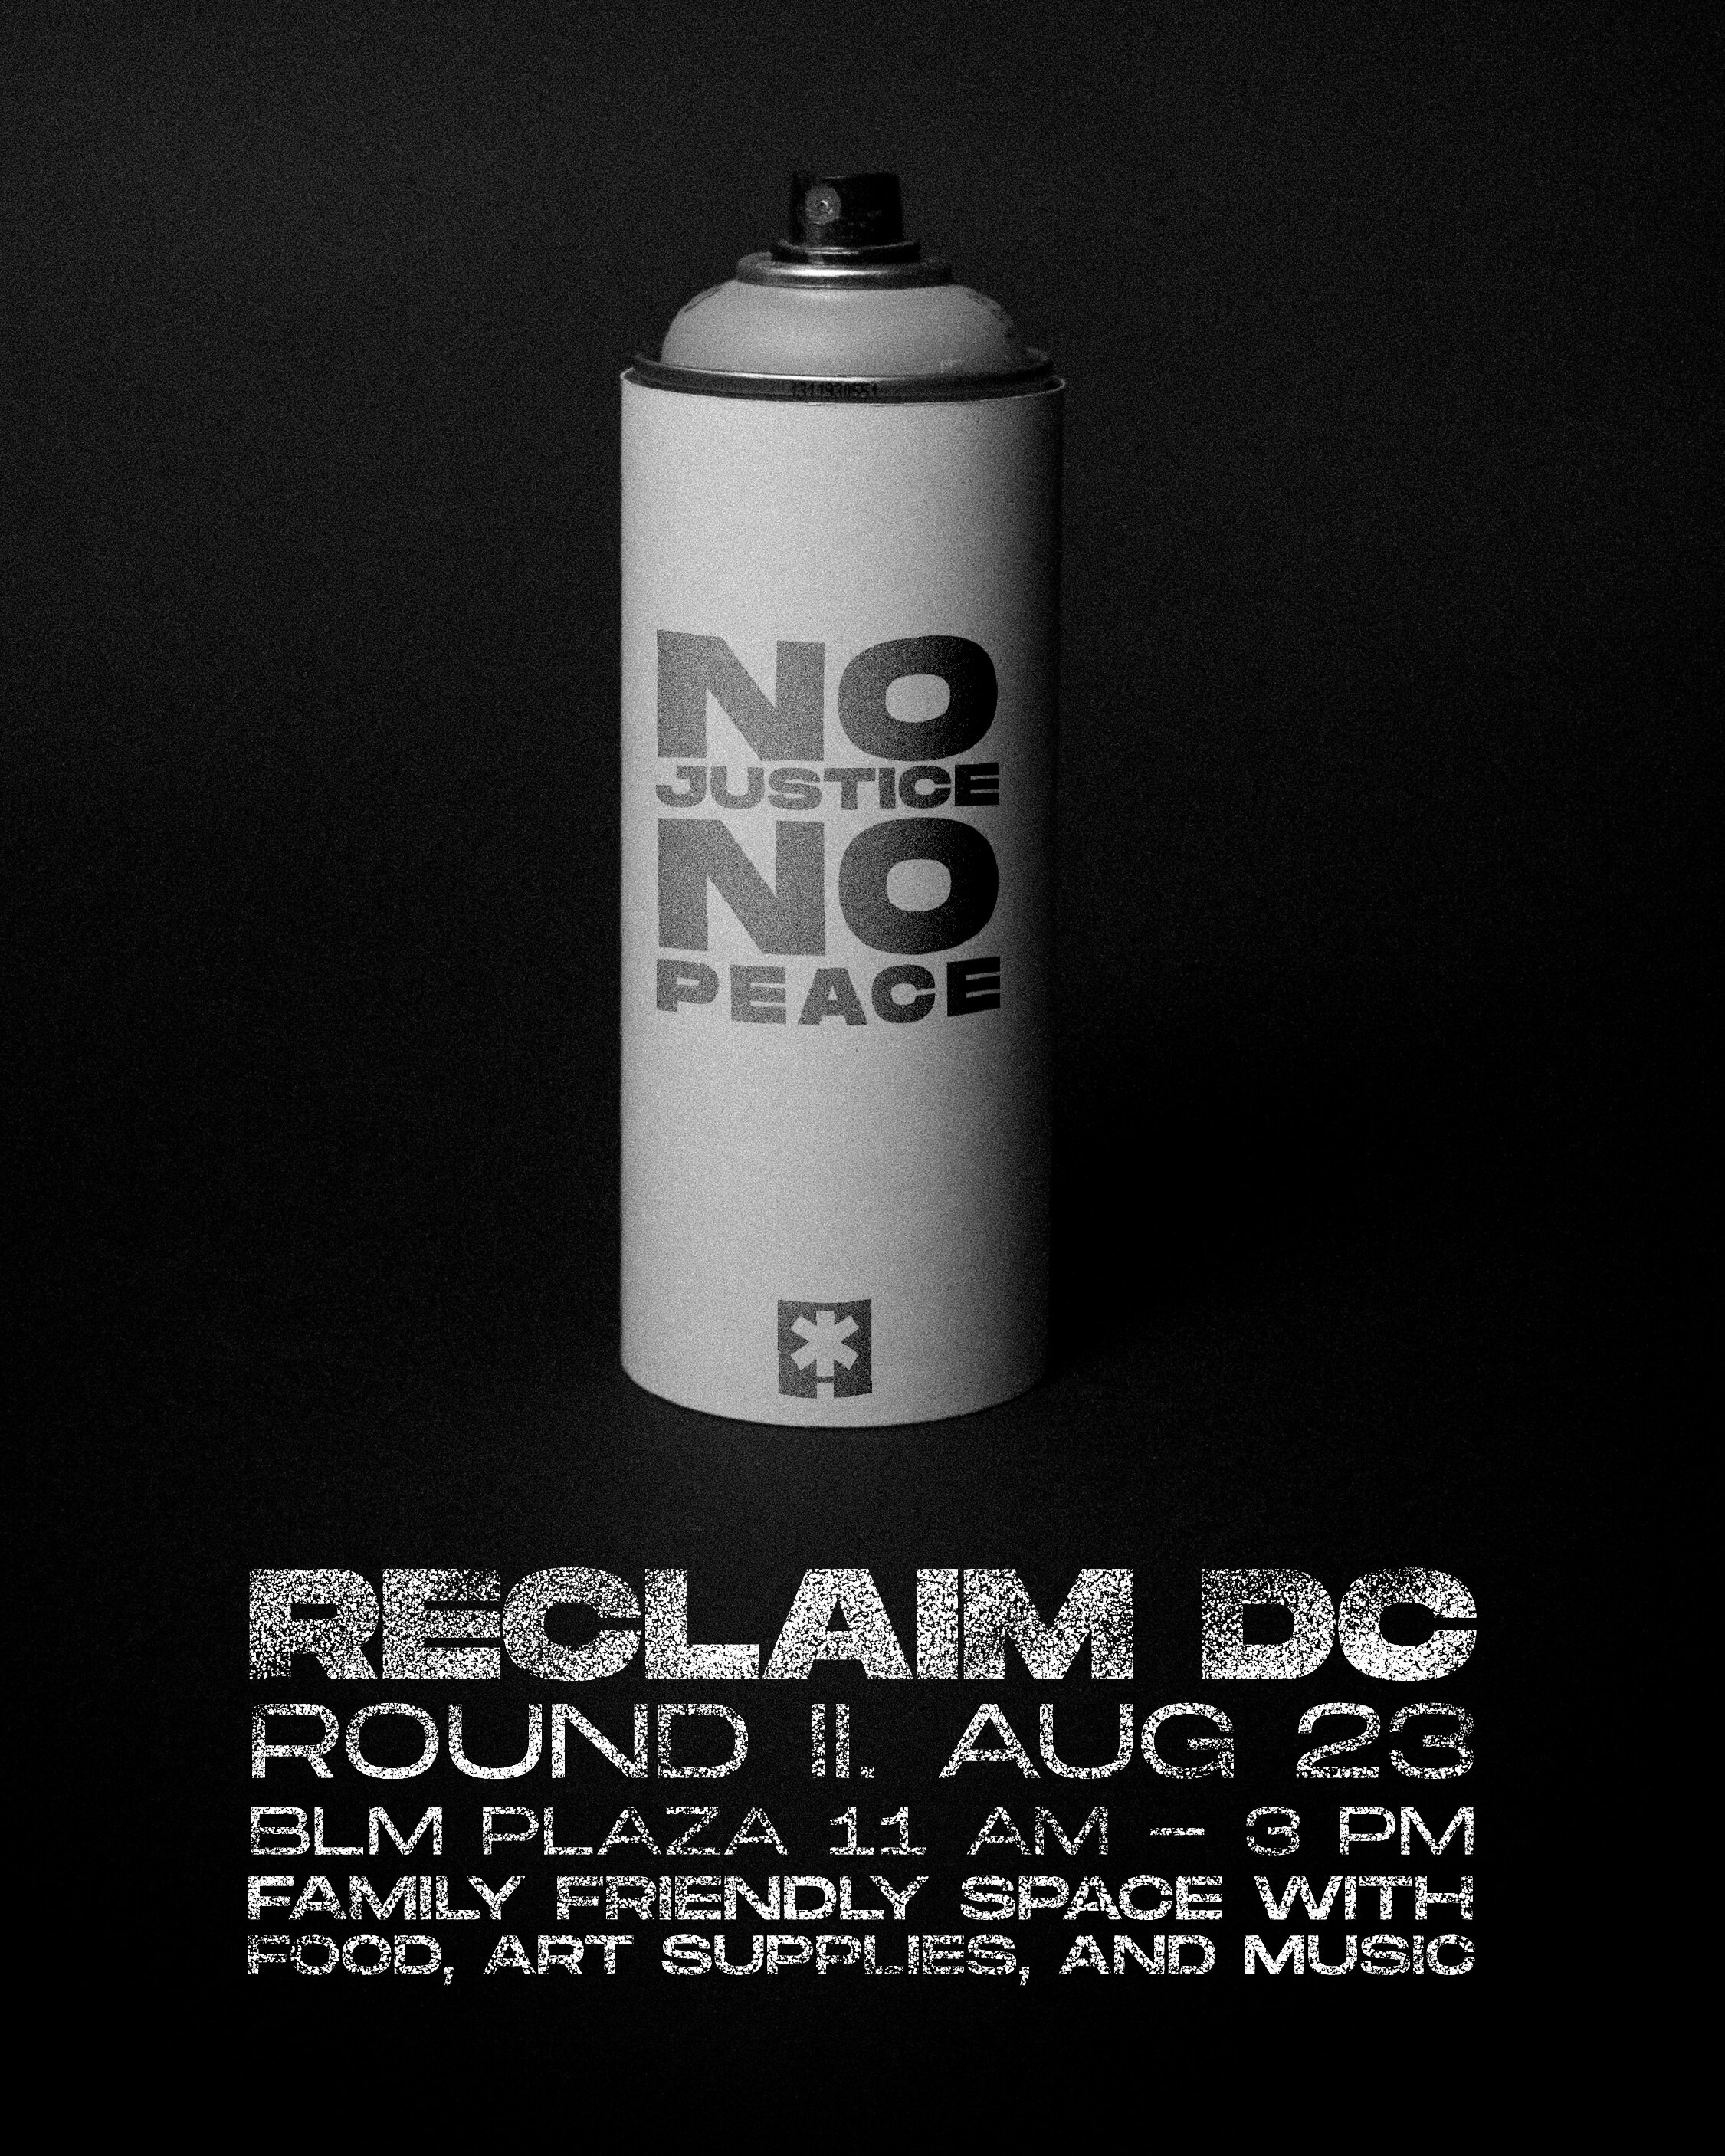  Flyer for Reclaim DC event featuring a photograph of a spray can with the words “No Justice, No Peace” on it. Black background 